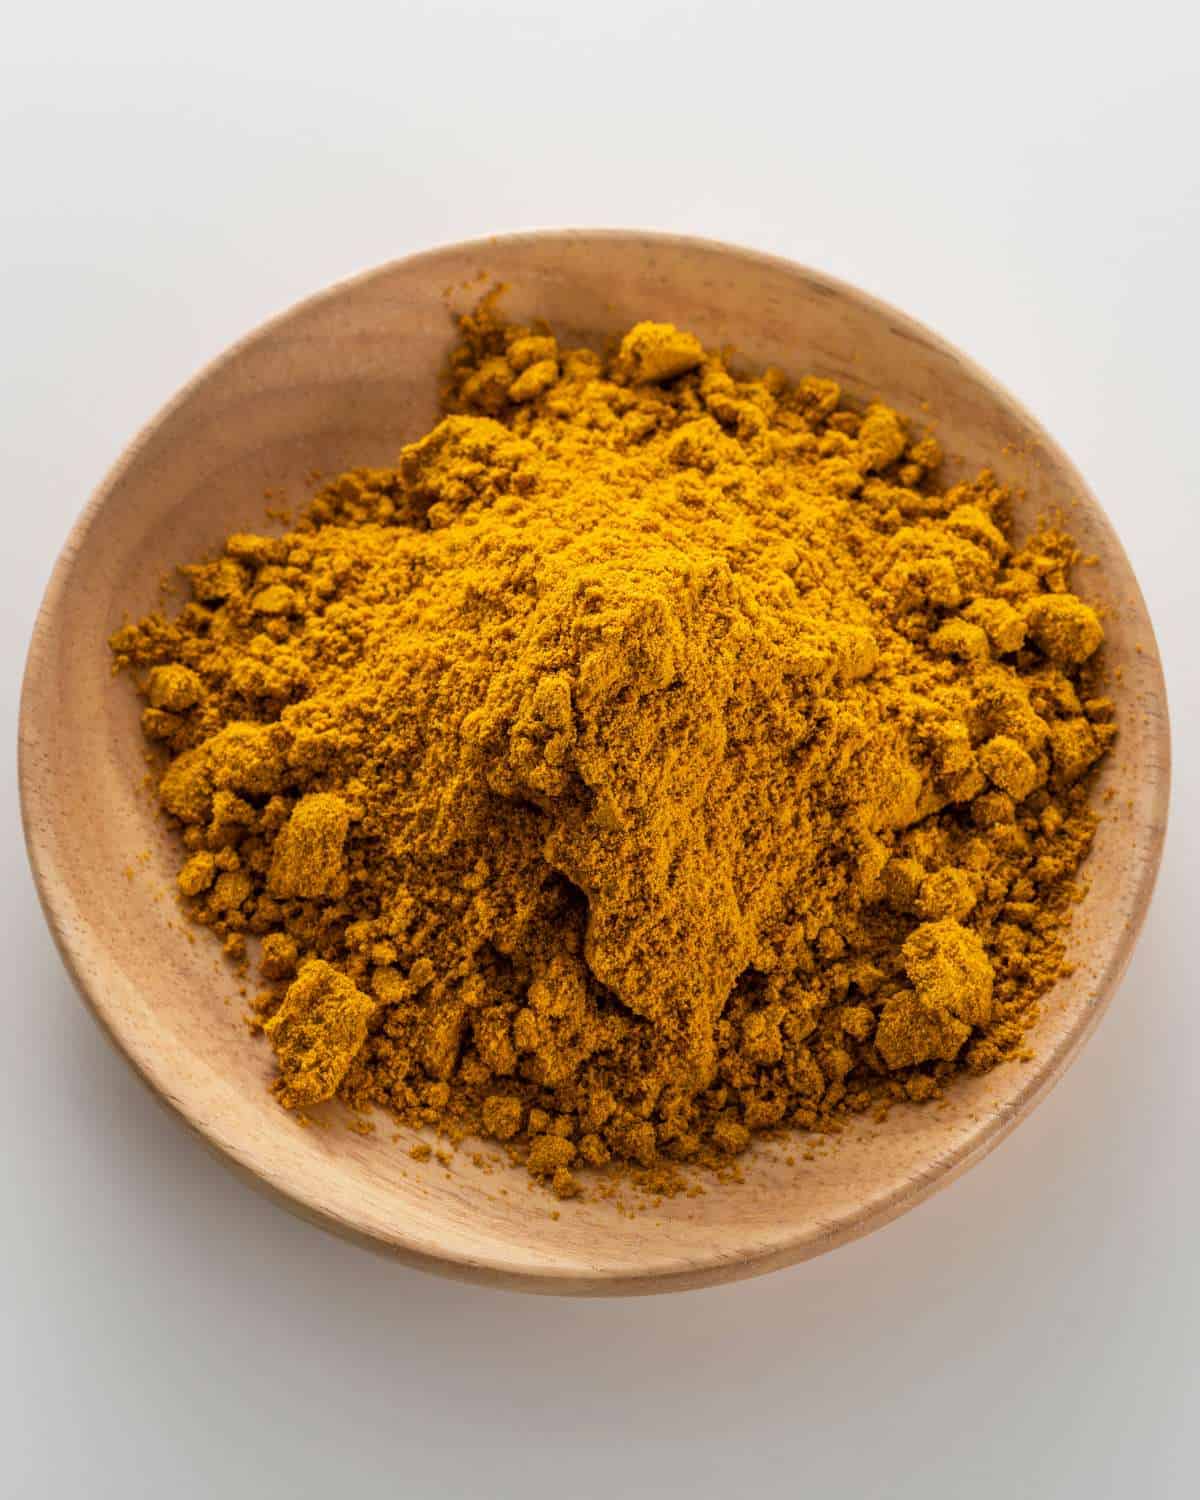 Curry powder piled high in a wooden bowl.